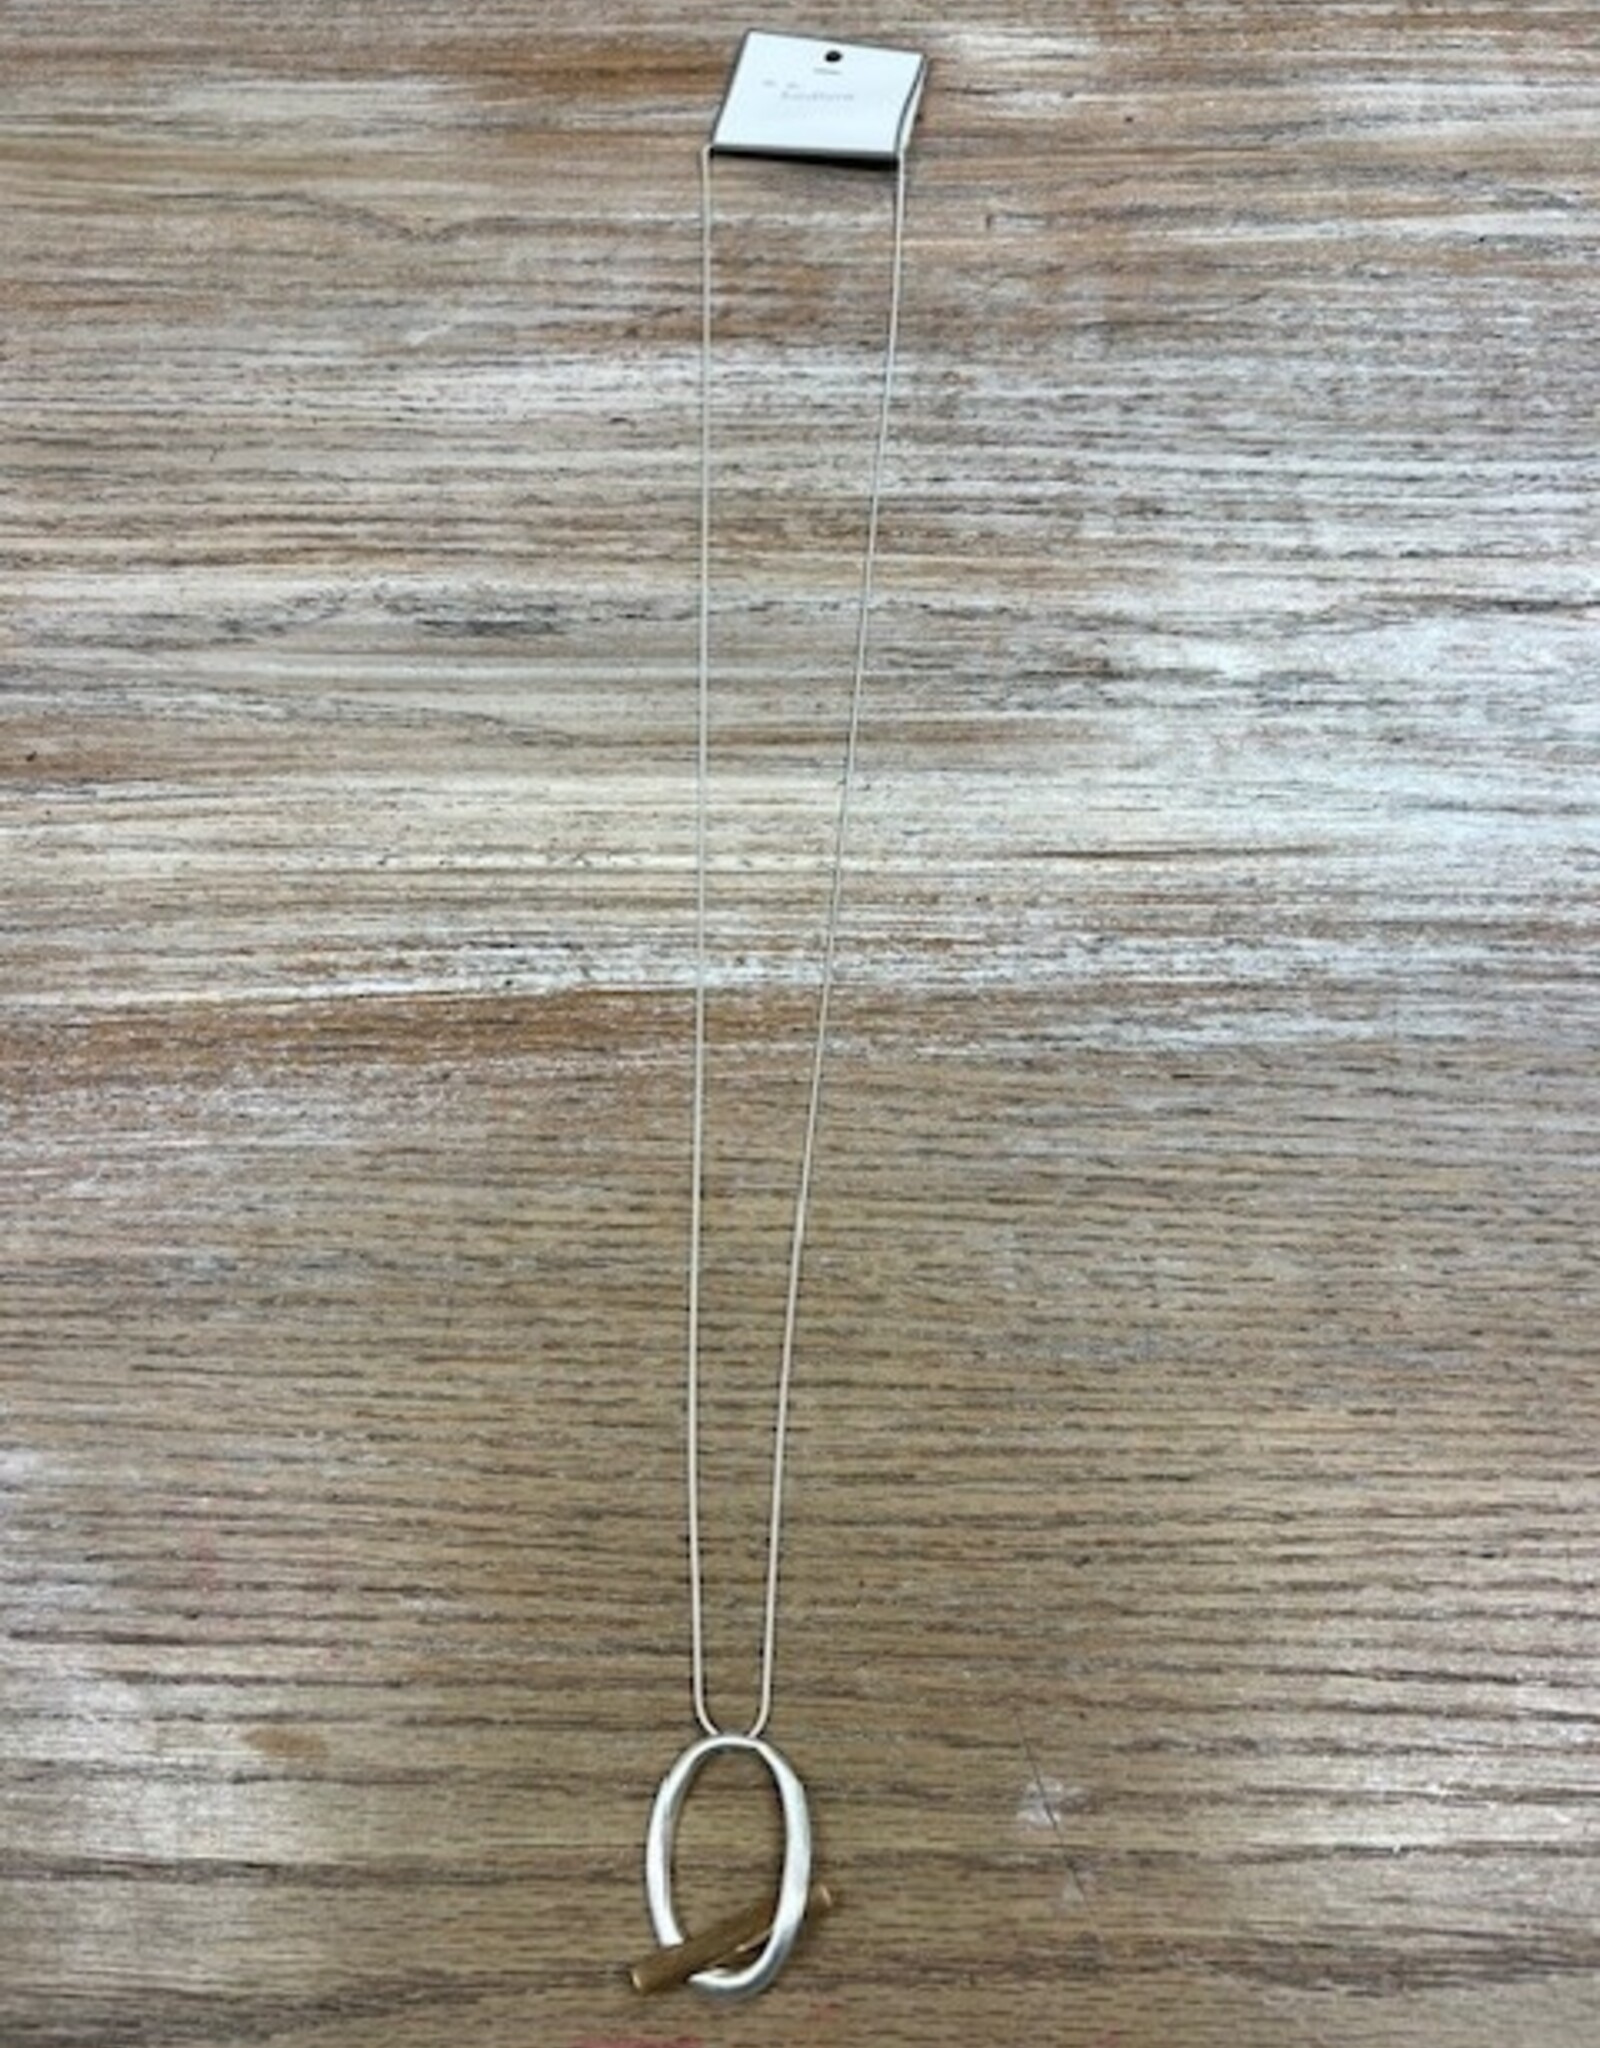 Jewelry Long Silver Circle Necklace w/ Gold Bar